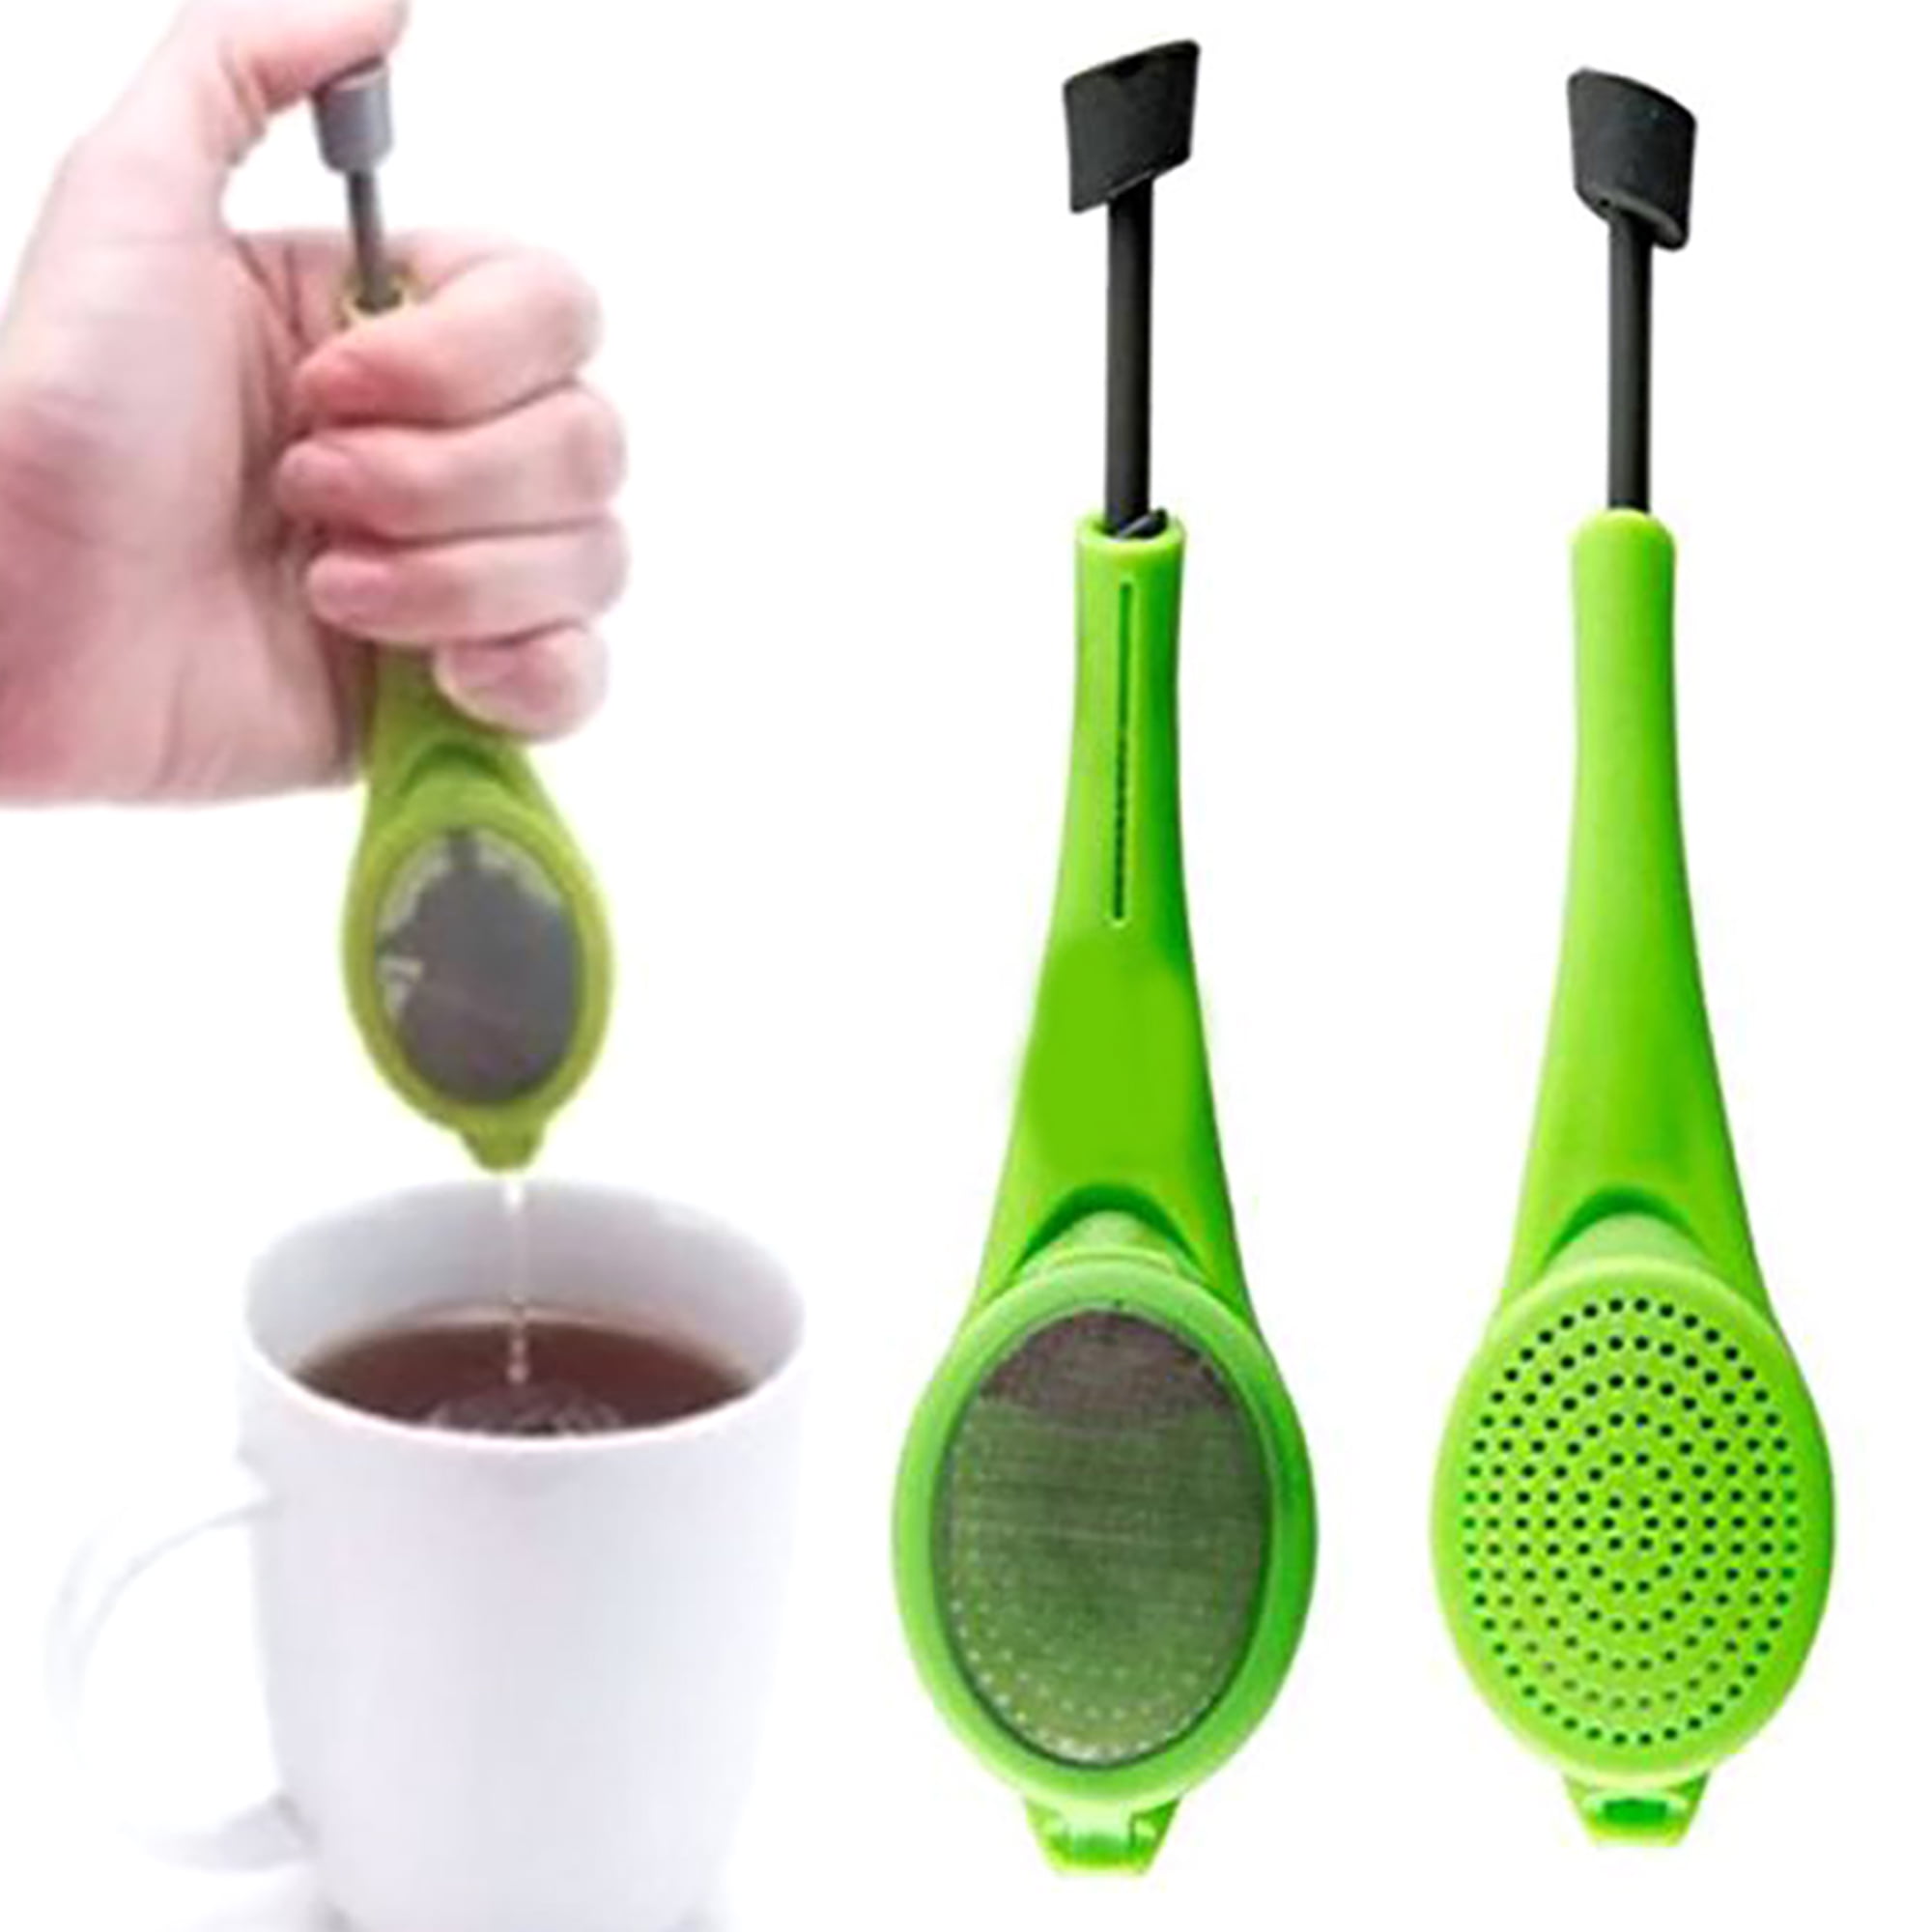 Ball Shape Tea Infuser Strainer Push Style by Generic 